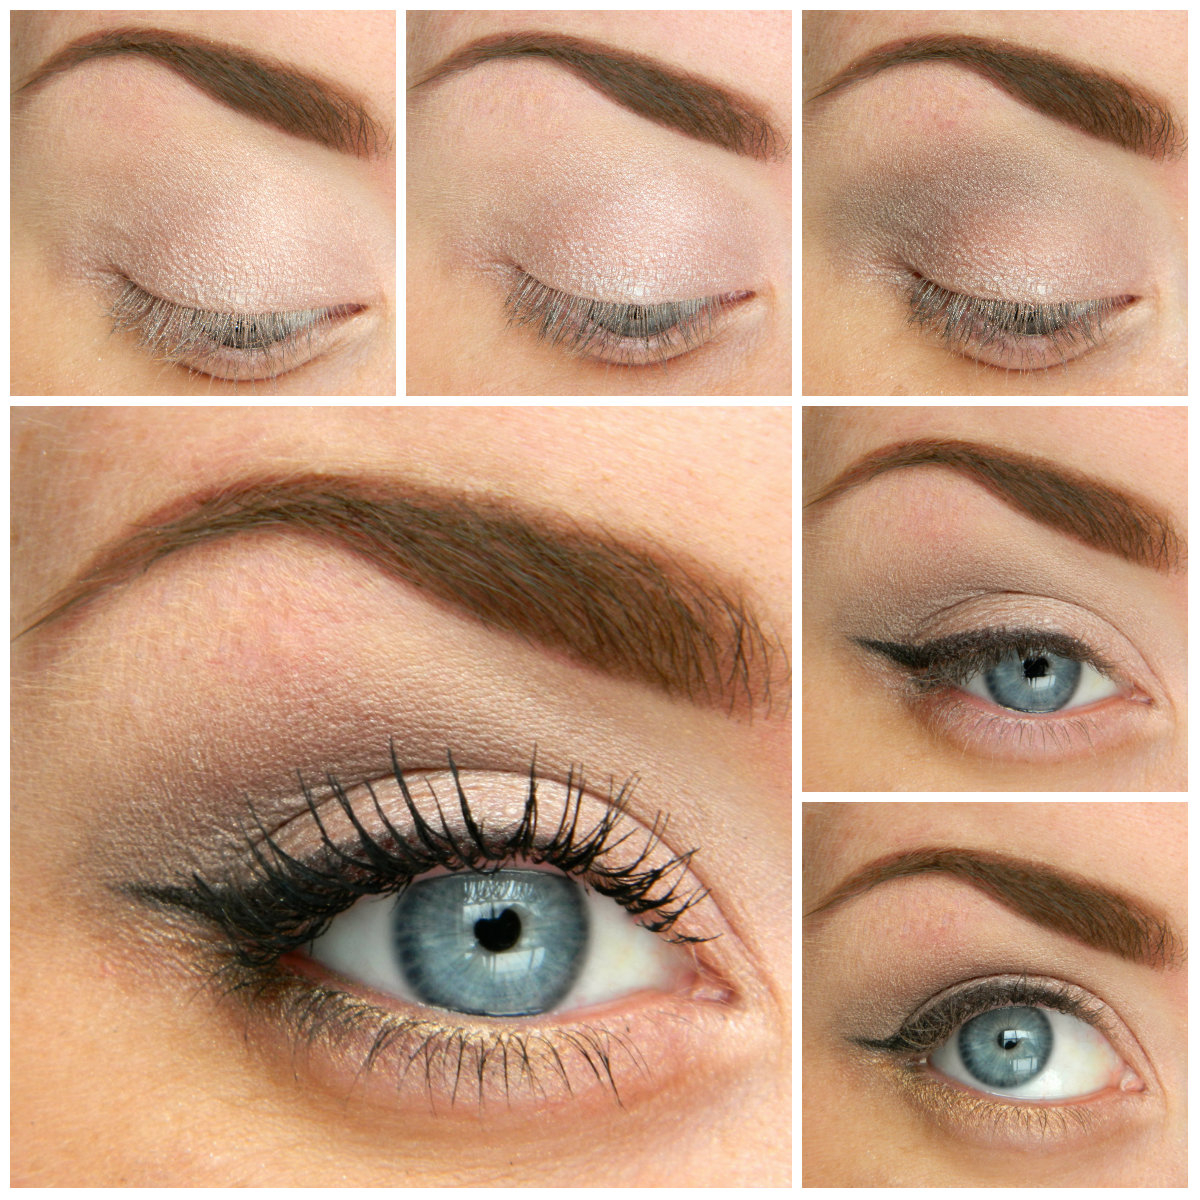 Eye Makeup Tips For Blue Eyes 5 Ways To Make Blue Eyes Pop With Proper Eye Makeup Her Style Code